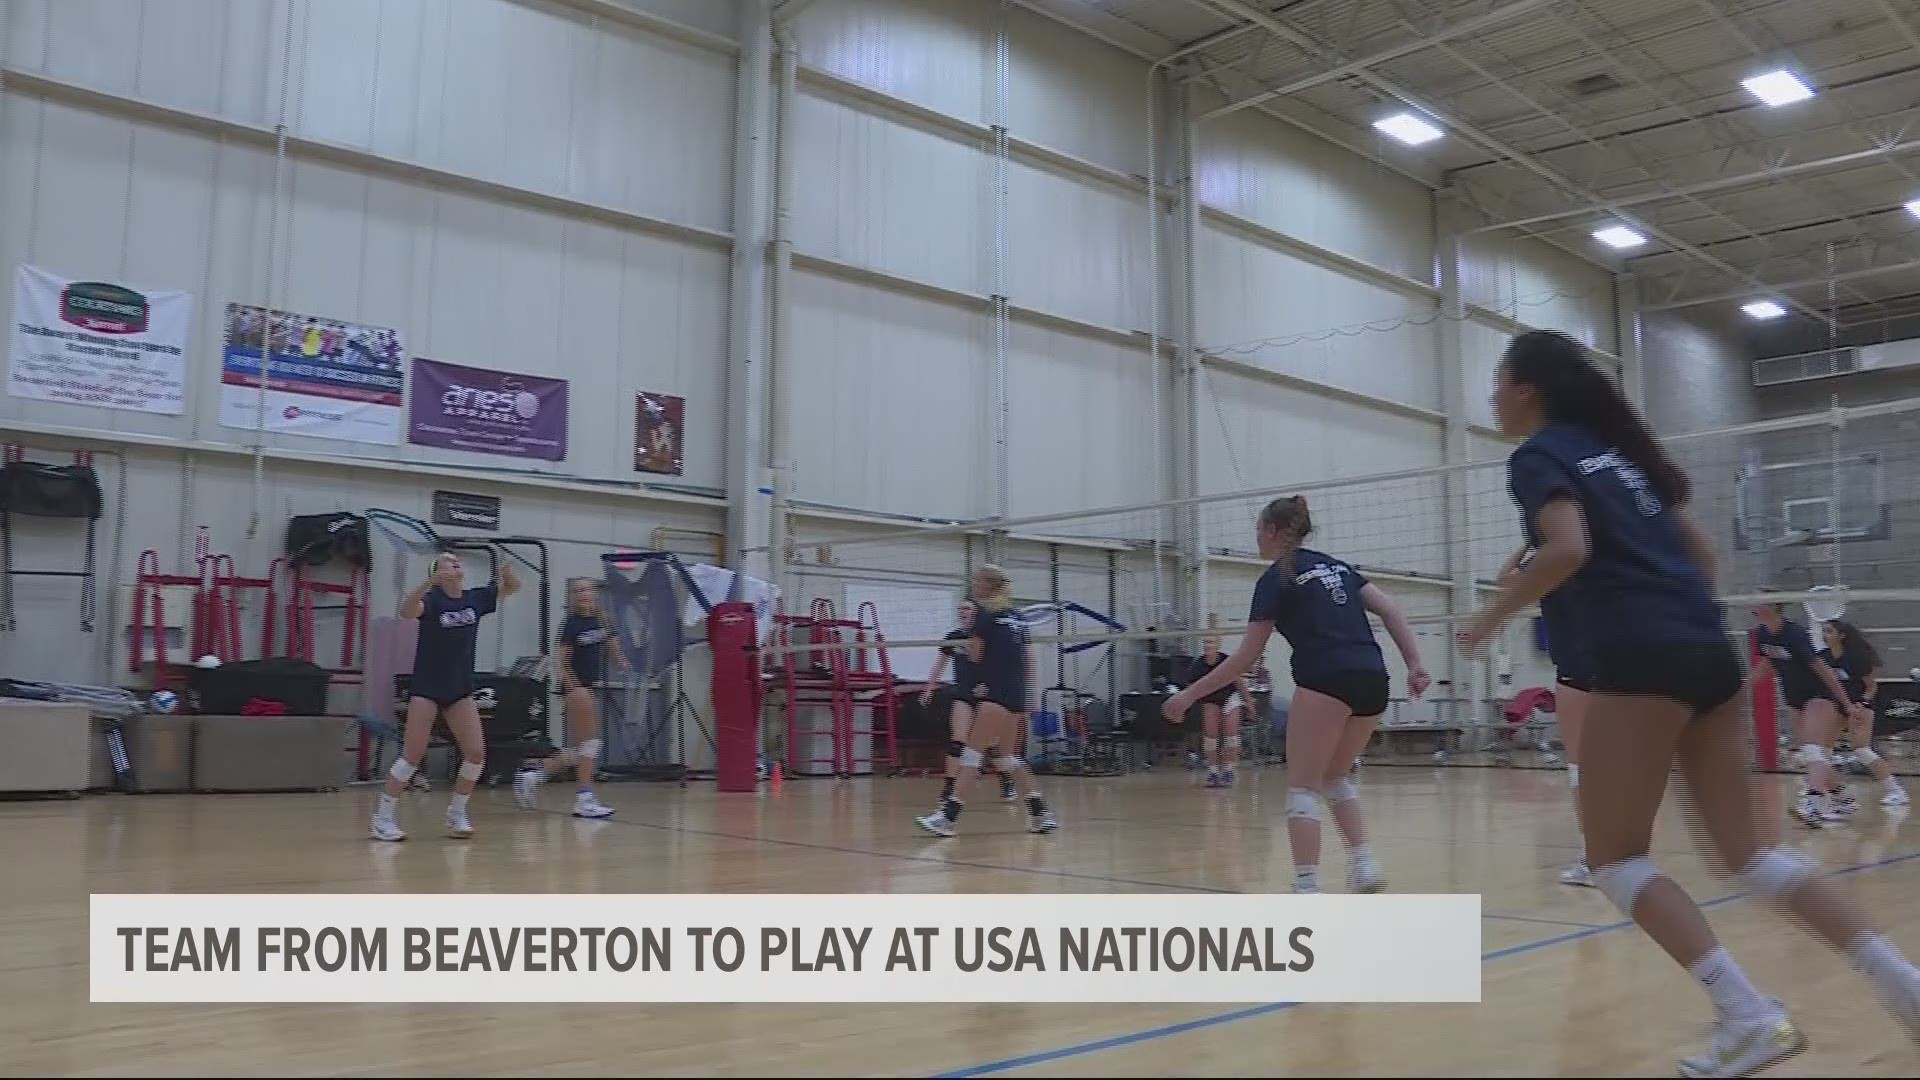 Team from Beaverton to play at USA Nationals